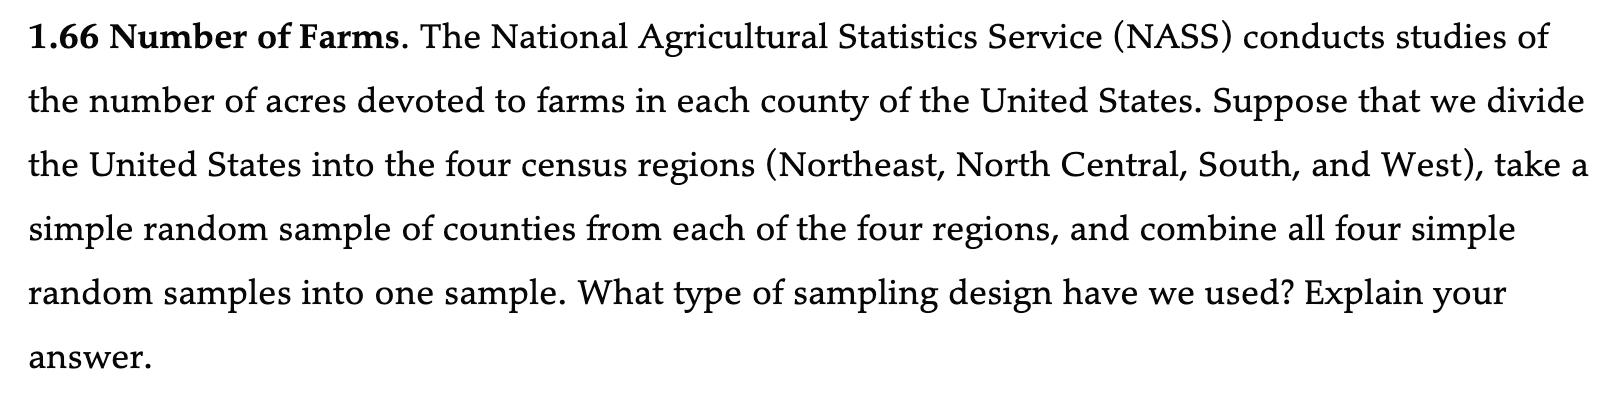 1.66 Number of Farms. The National Agricultural Statistics Service (NASS) conducts studies ofthe number of acres devoted to